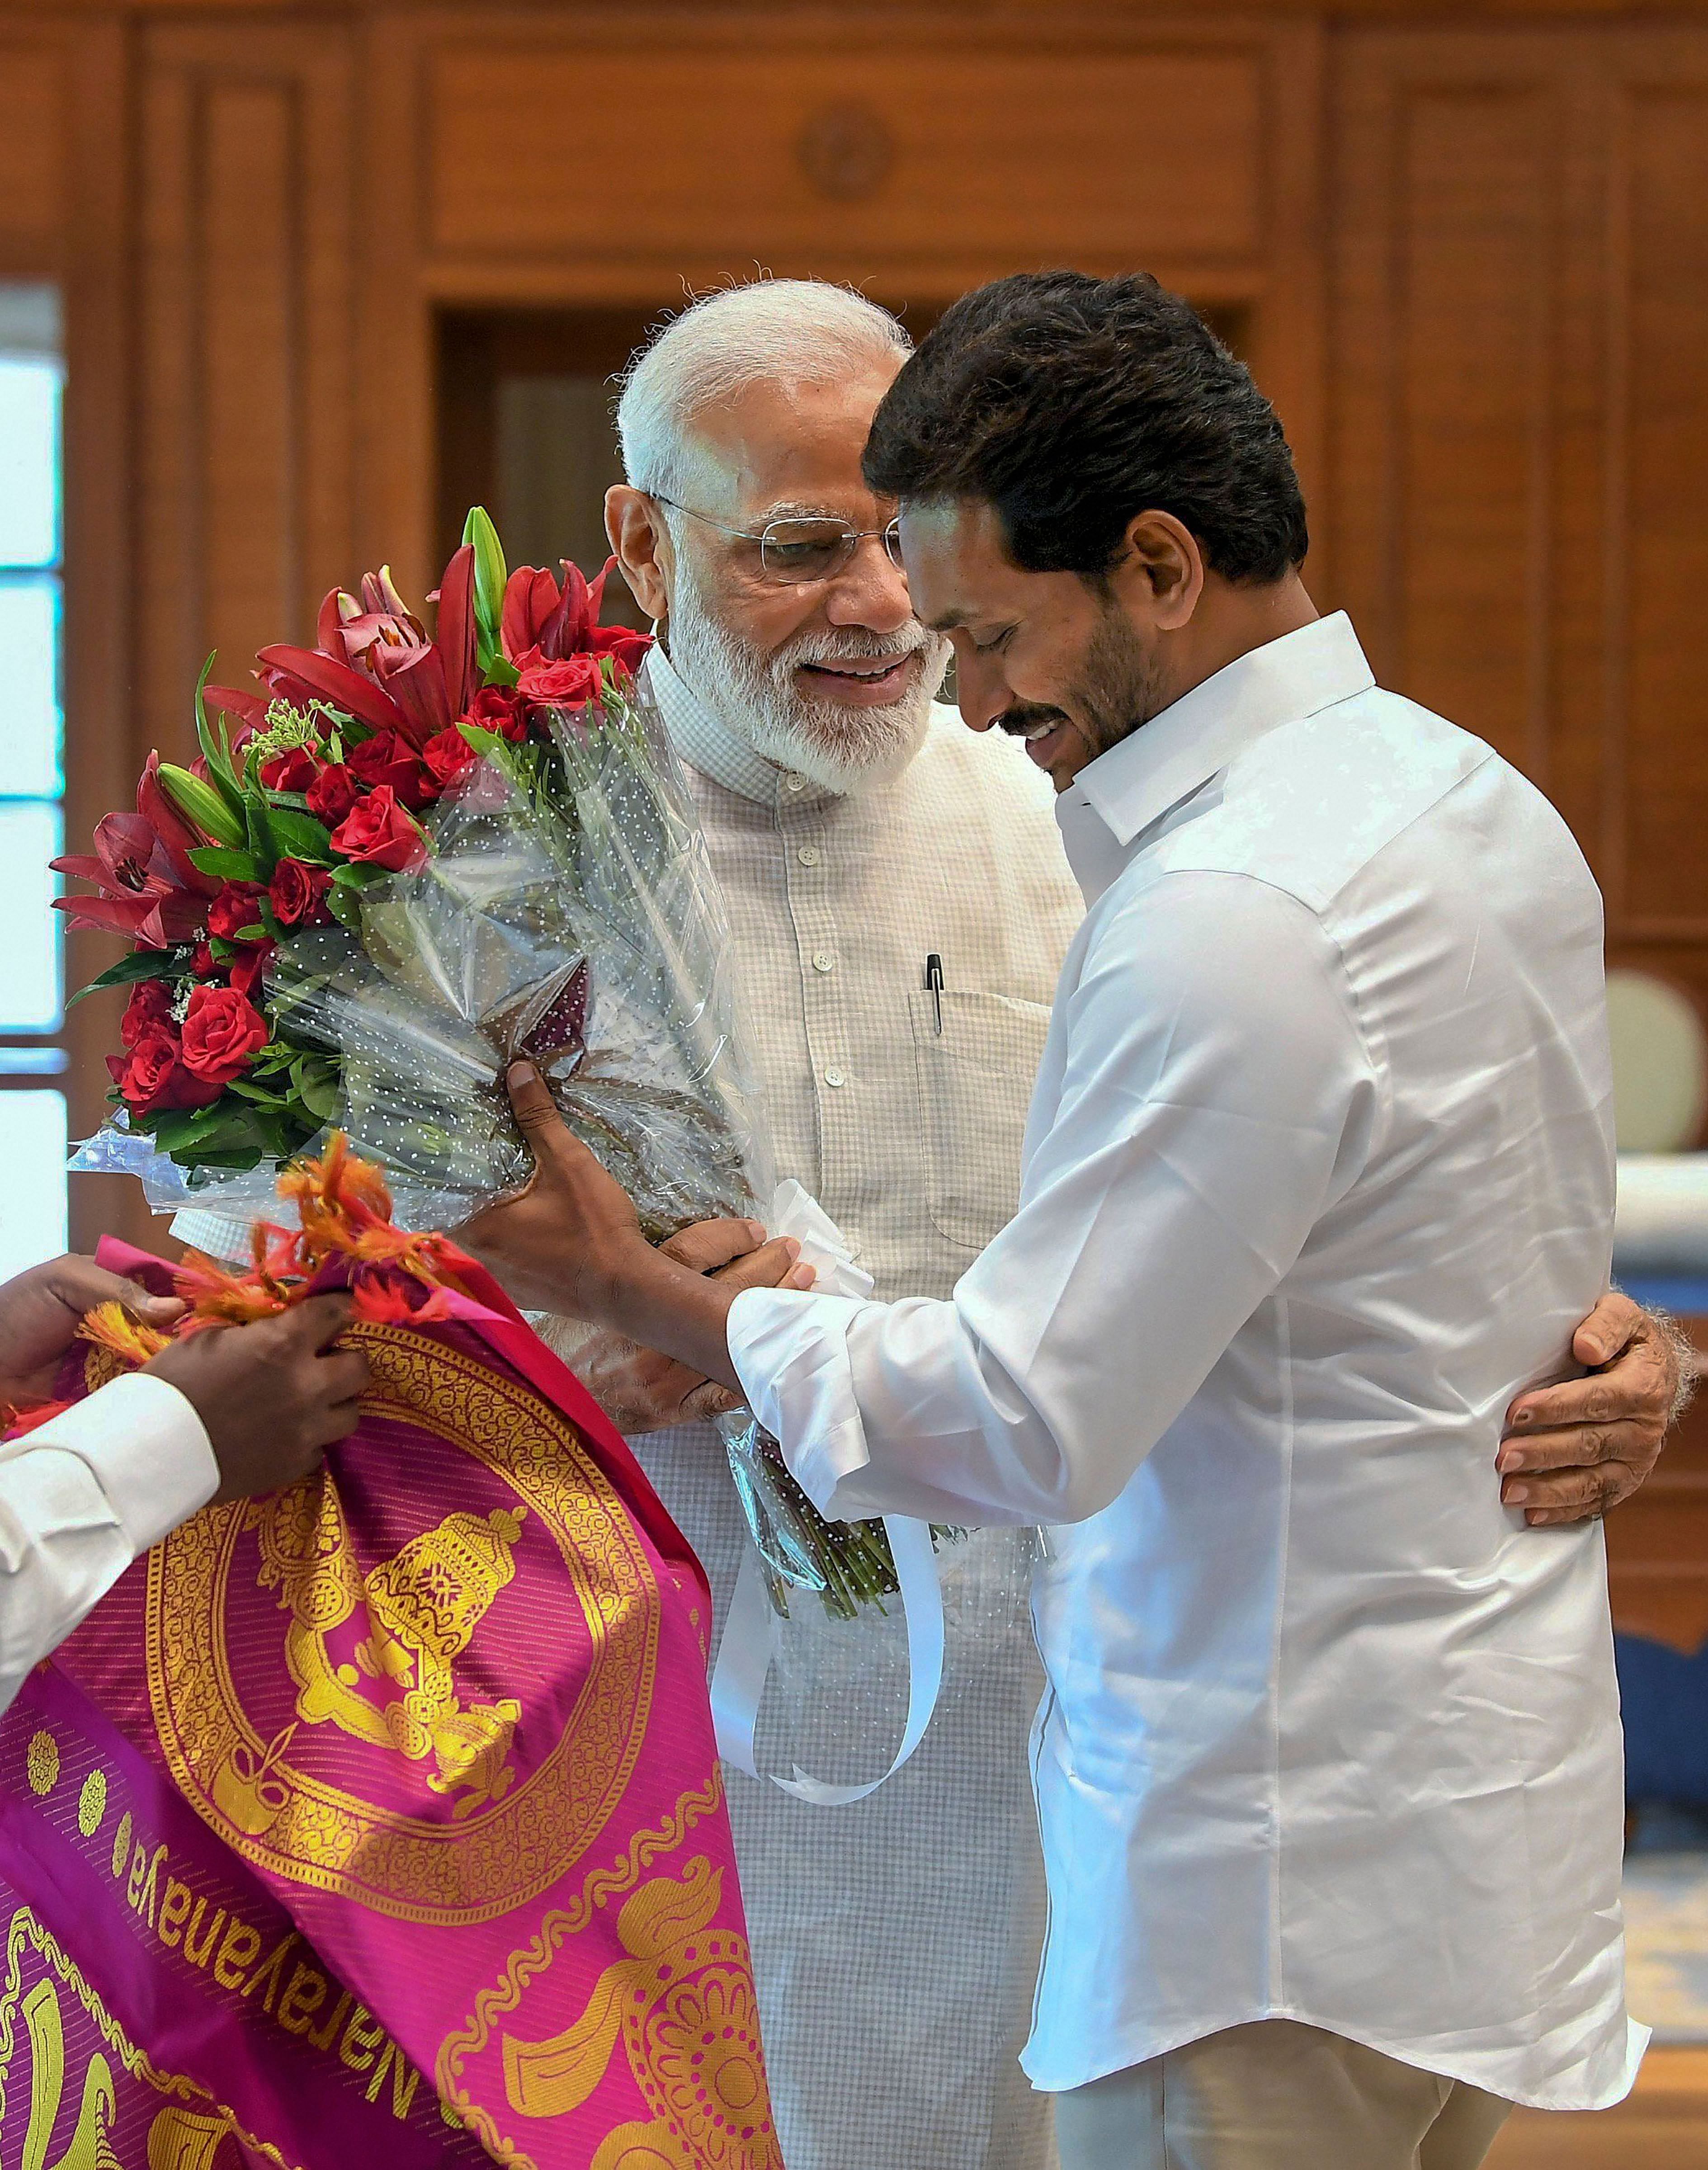  All the three major political parties in the Telugu states of Andhra Pradesh and Telangana have come in total support of the union government’s decision to do away with the special status given to the state of Jammu and Kashmir. (PTI Photo)